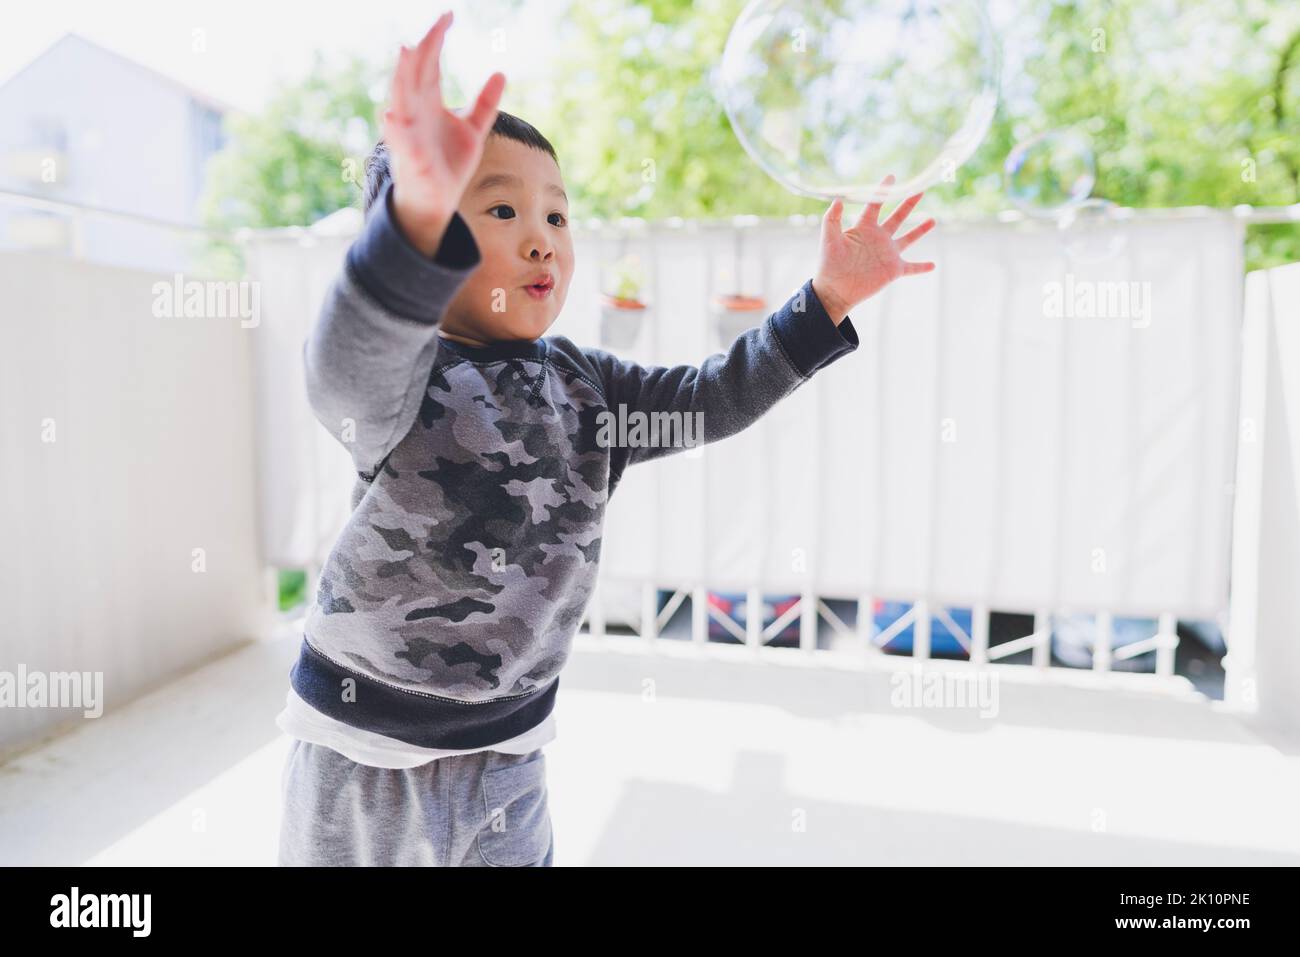 A toddler chasing a bubble on a balcony Stock Photo